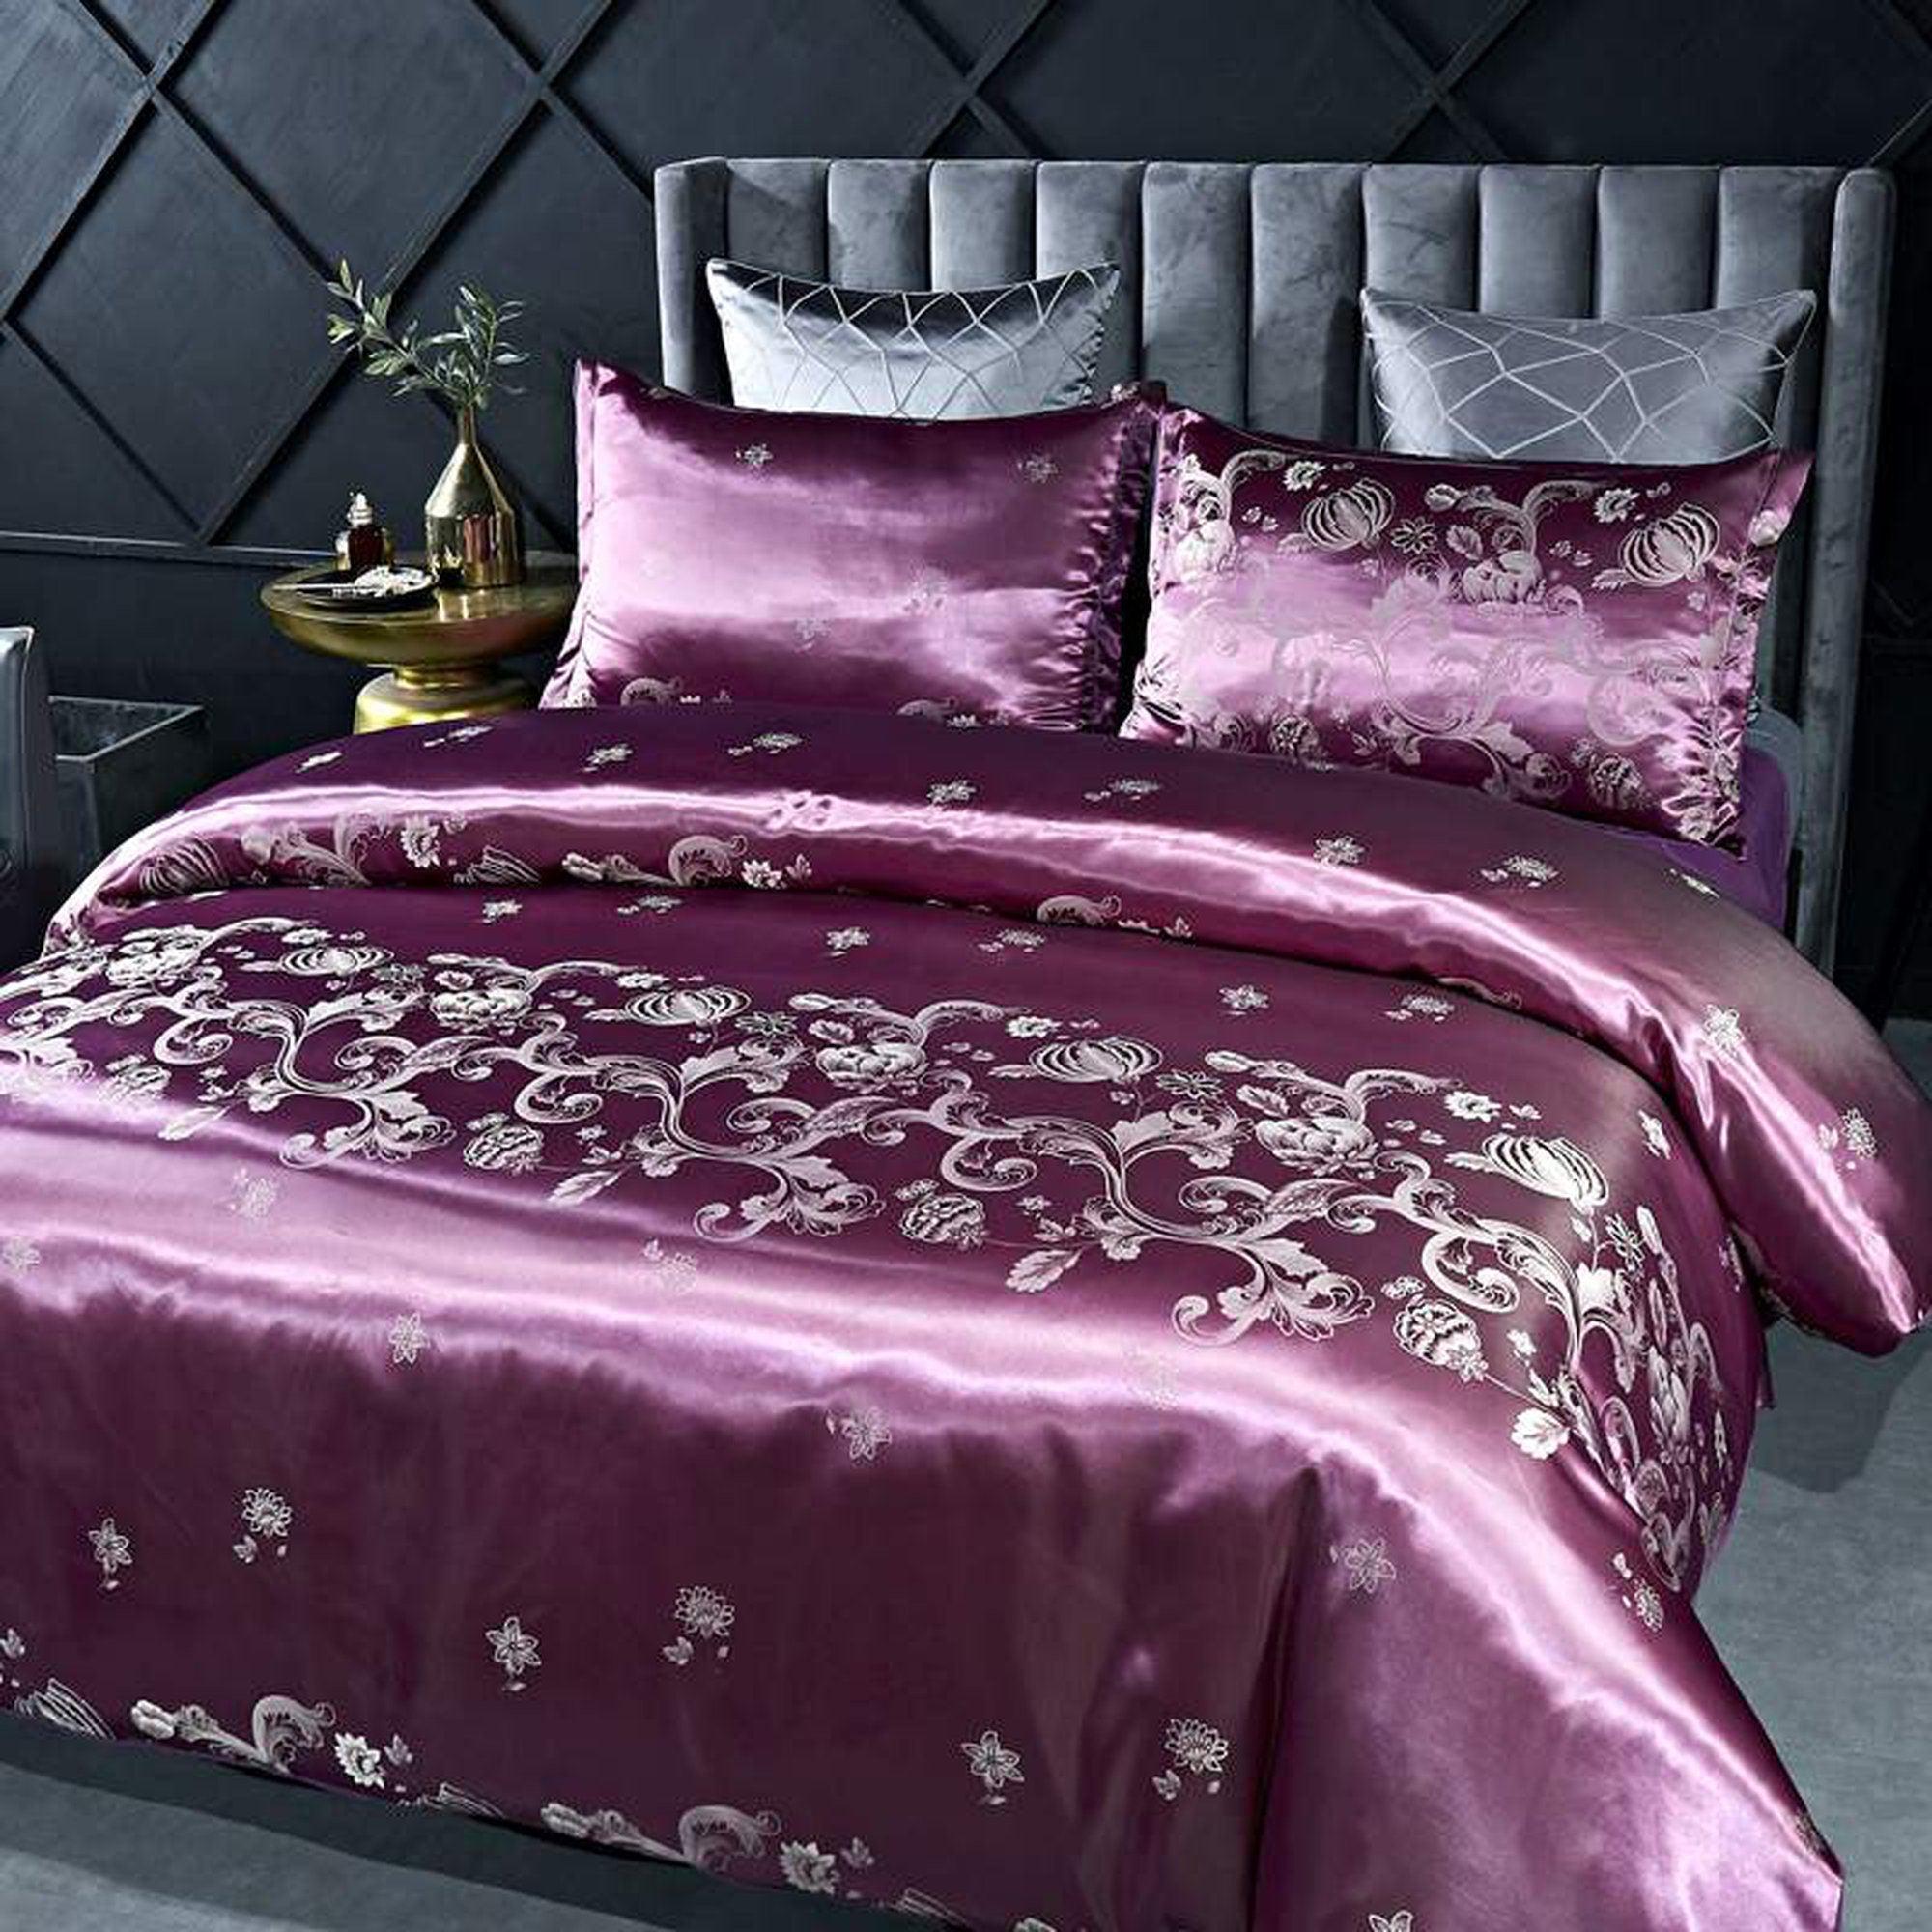 daintyduvet Luxury Pink Duvet Cover Set, Jacquard Fabric Aesthetic Bedding Decorative, Embroidered Bedding Set